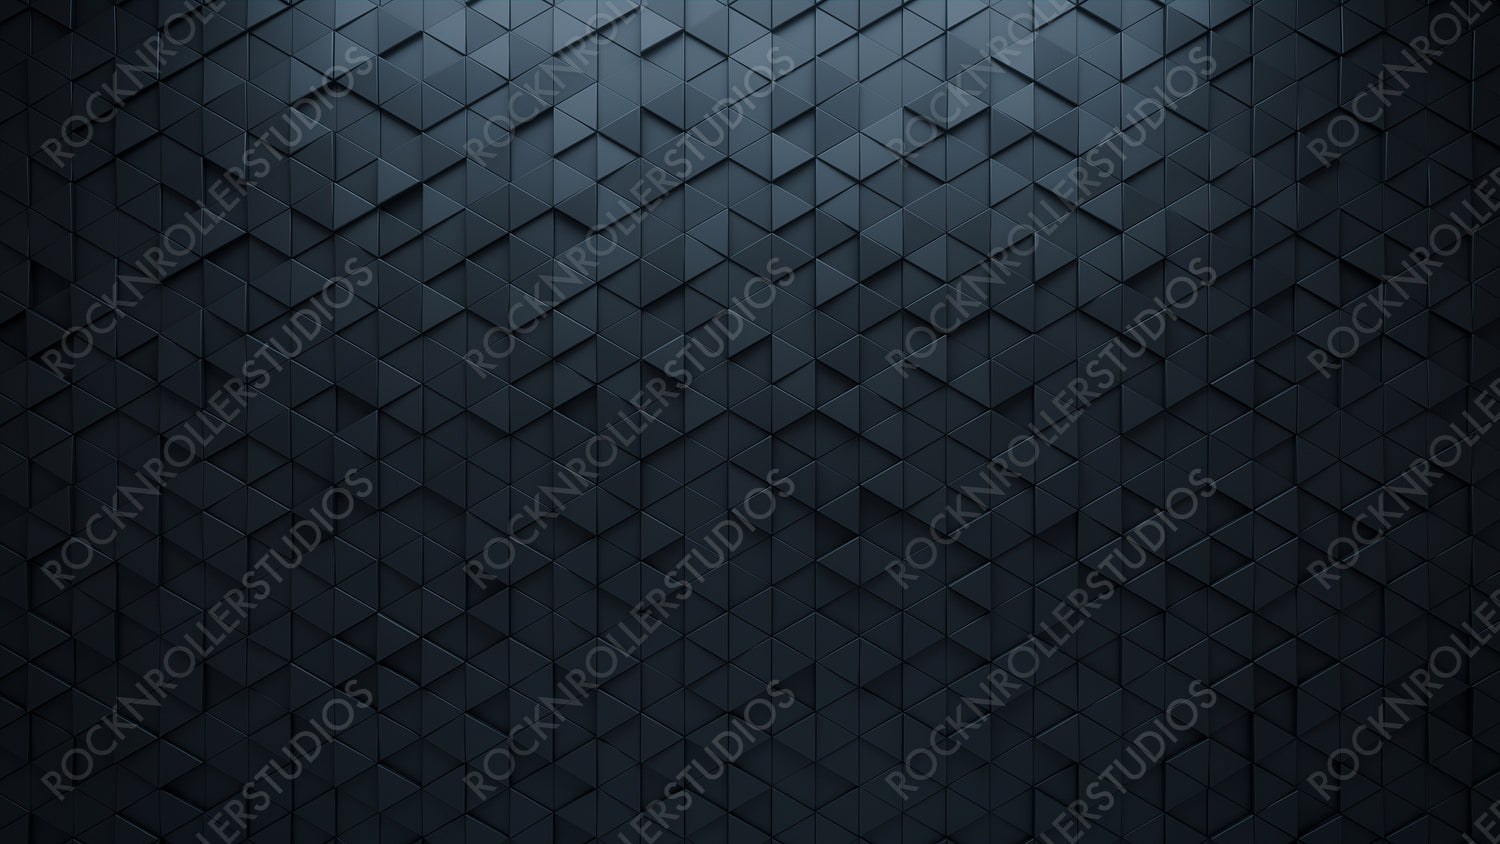 Polished, 3D Mosaic Tiles arranged in the shape of a wall. Black, Triangular, Bricks stacked to create a Semigloss block background. 3D Render